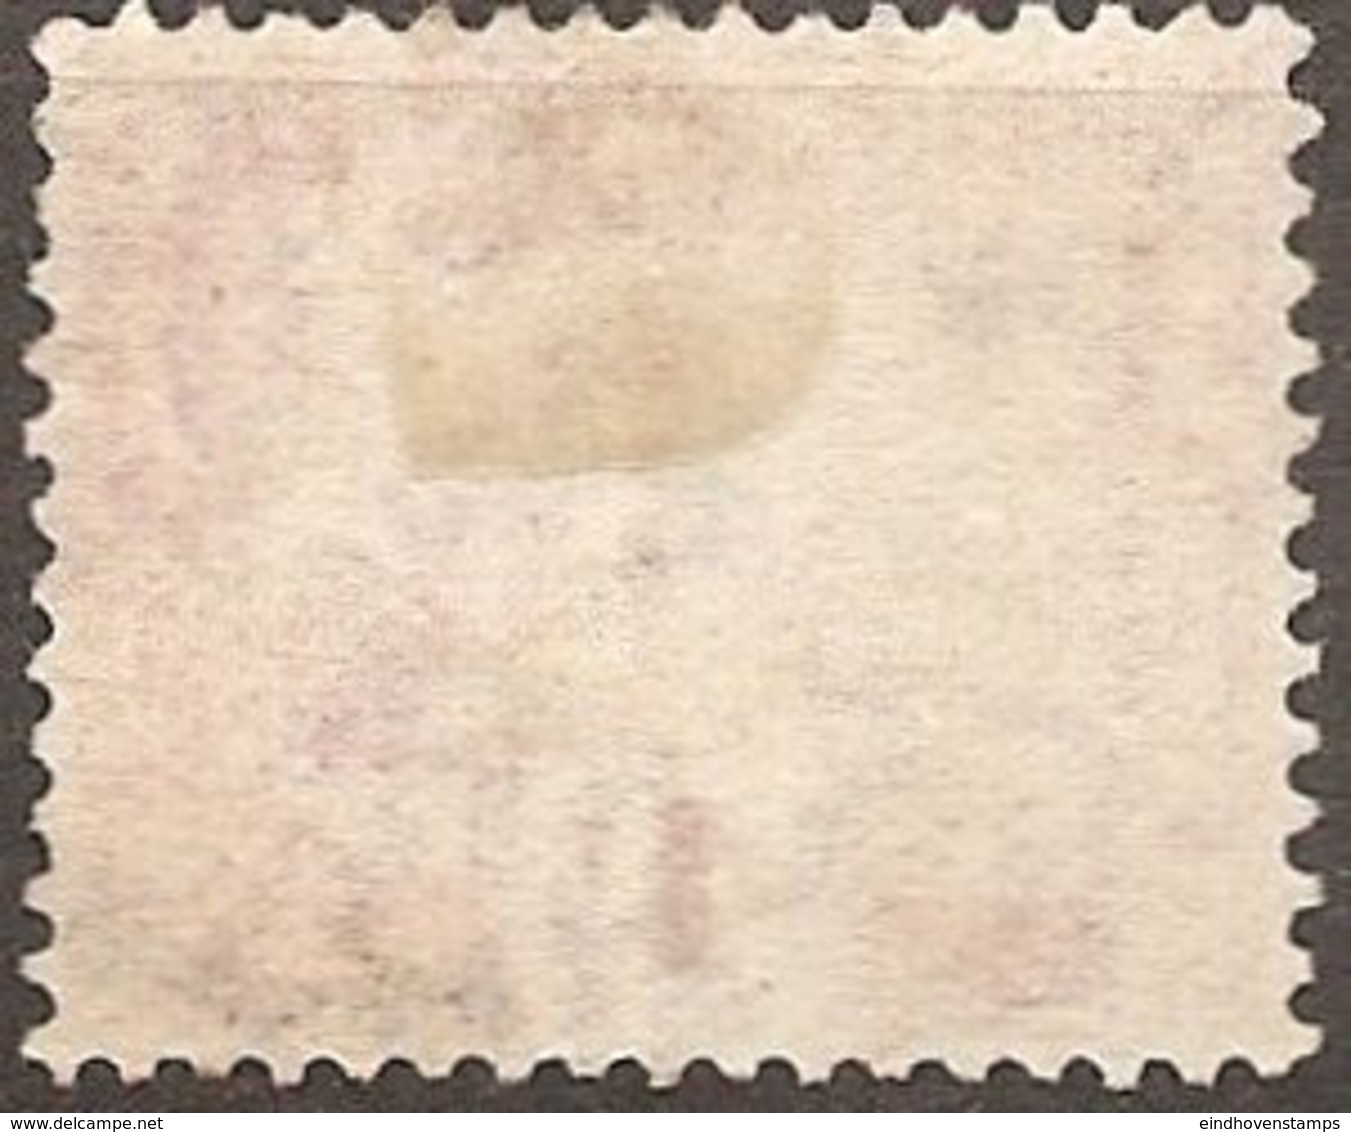 Hong Kong 1924 Posstage Due 4 Cents Red Cancelled - Postage Due